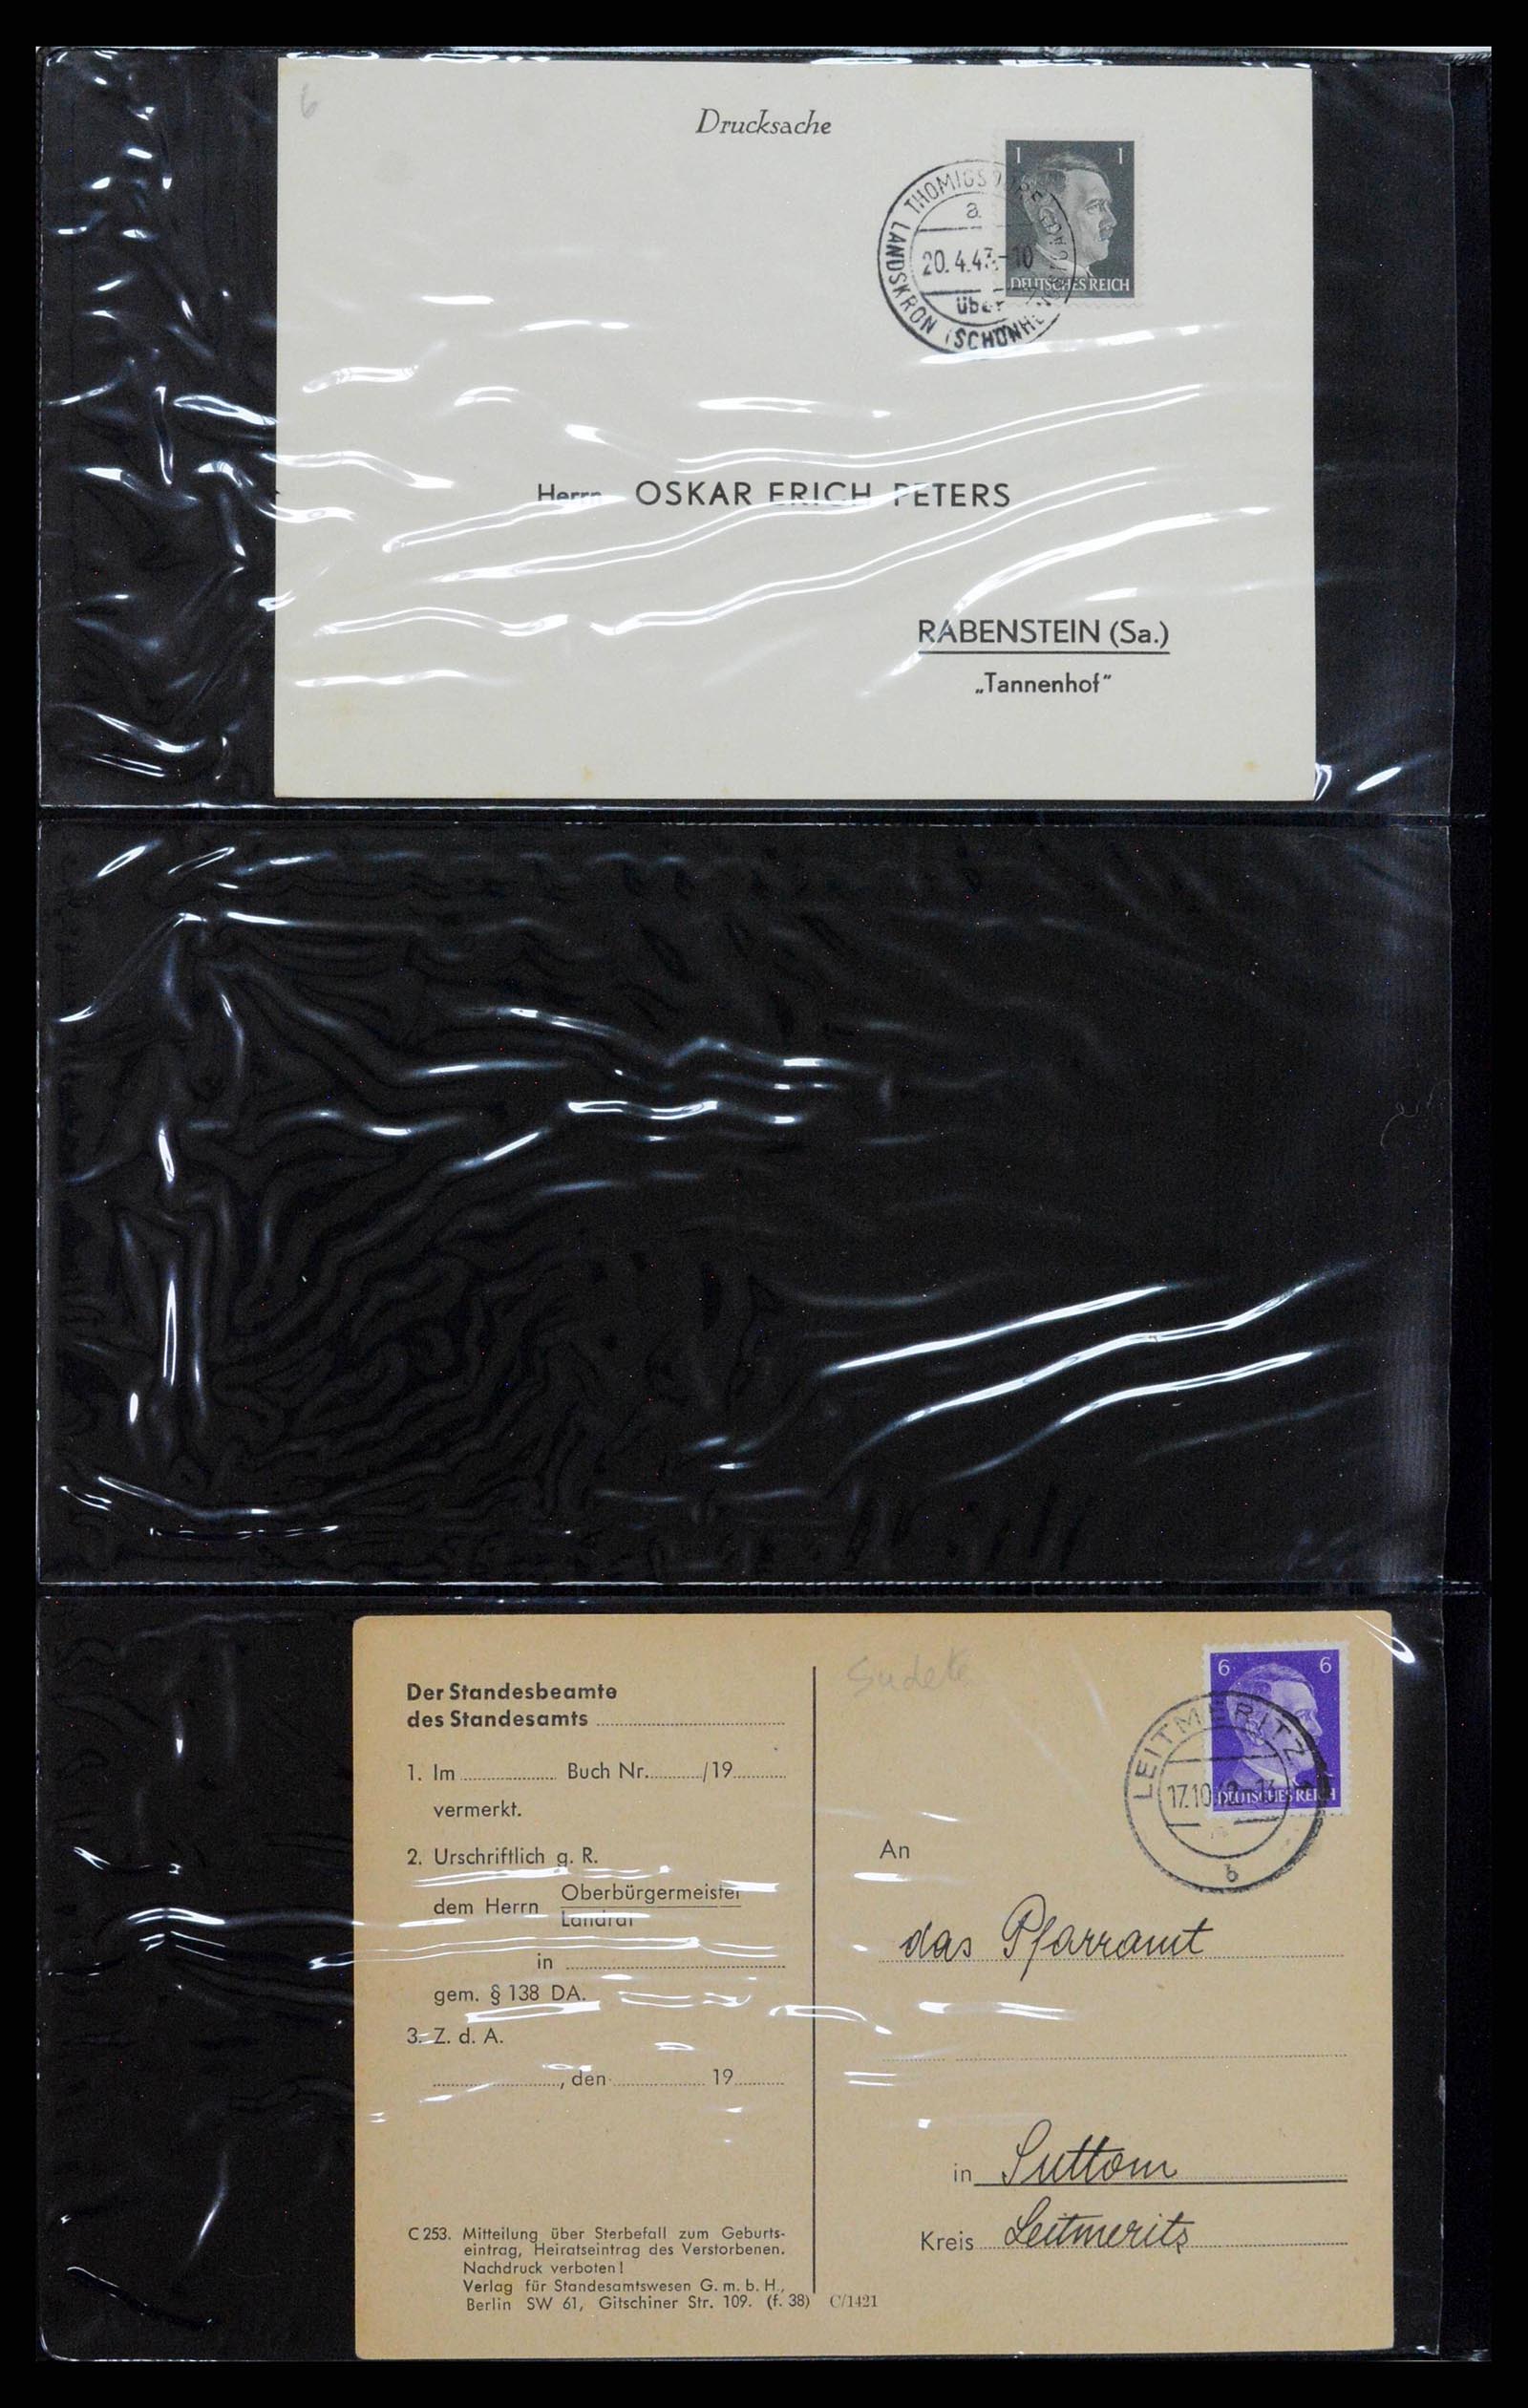 38646 0150 - Stamp collection 38646 Germany covers and cards 1940-1945.